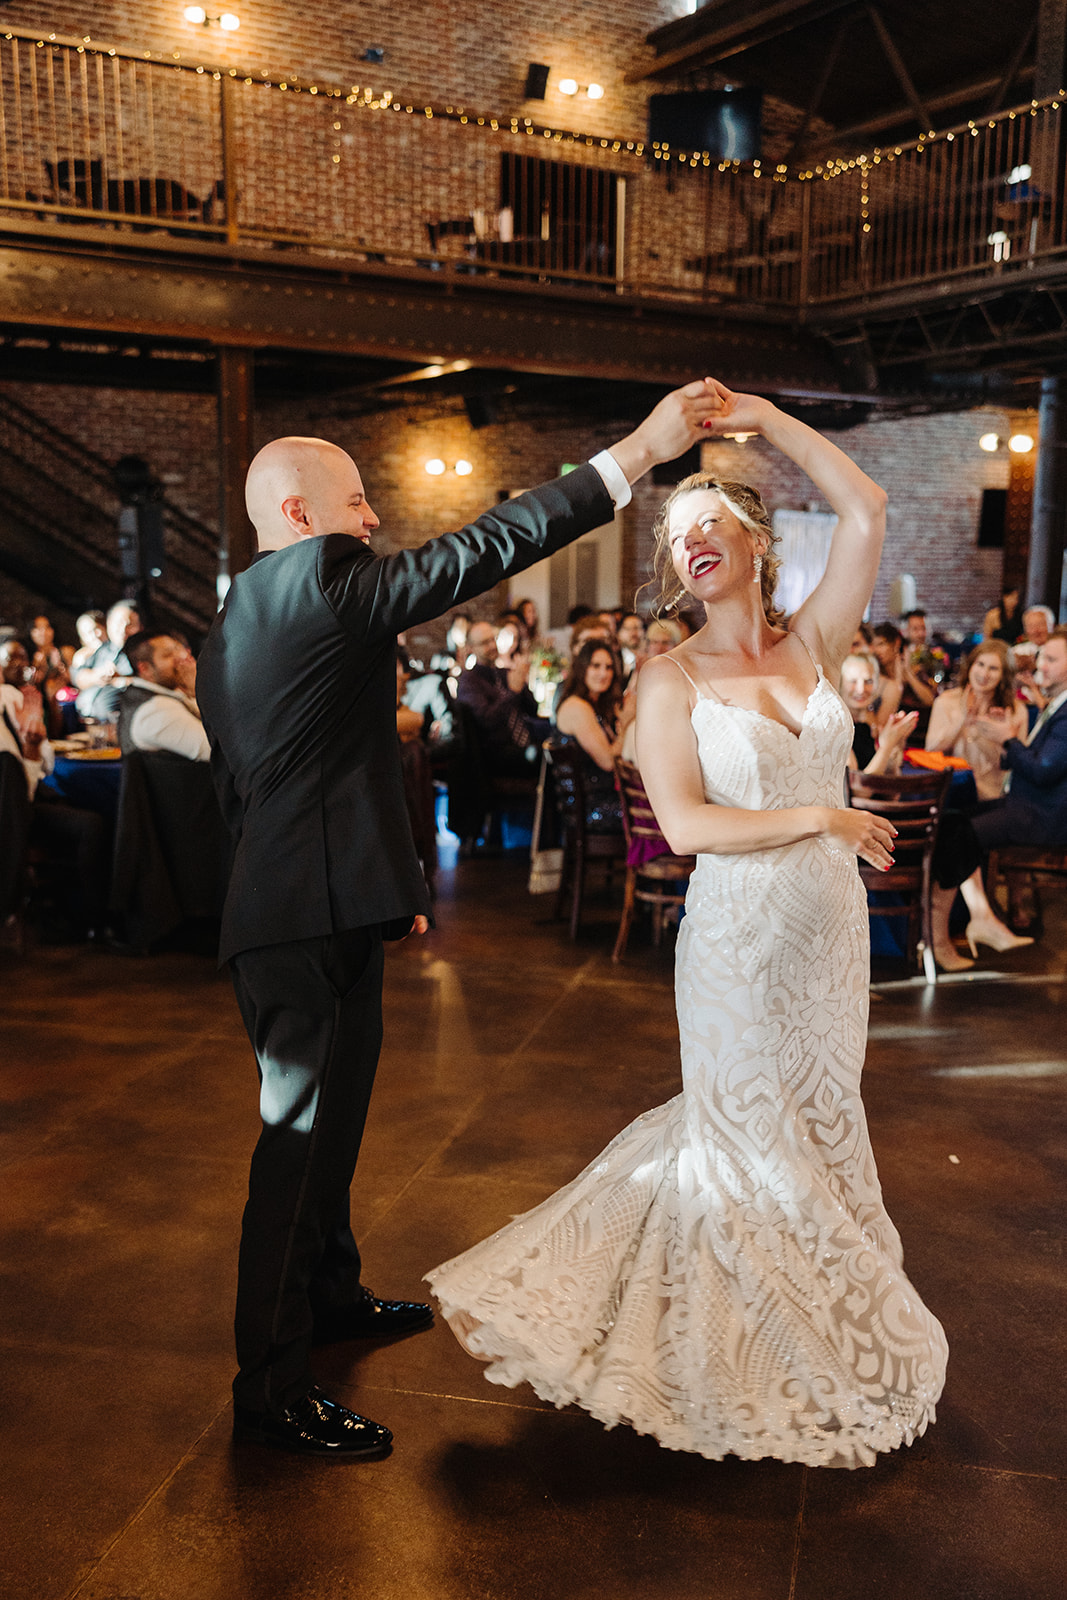 The groom twirls his new wife during their first dance at their industrial Mile High Station wedding.